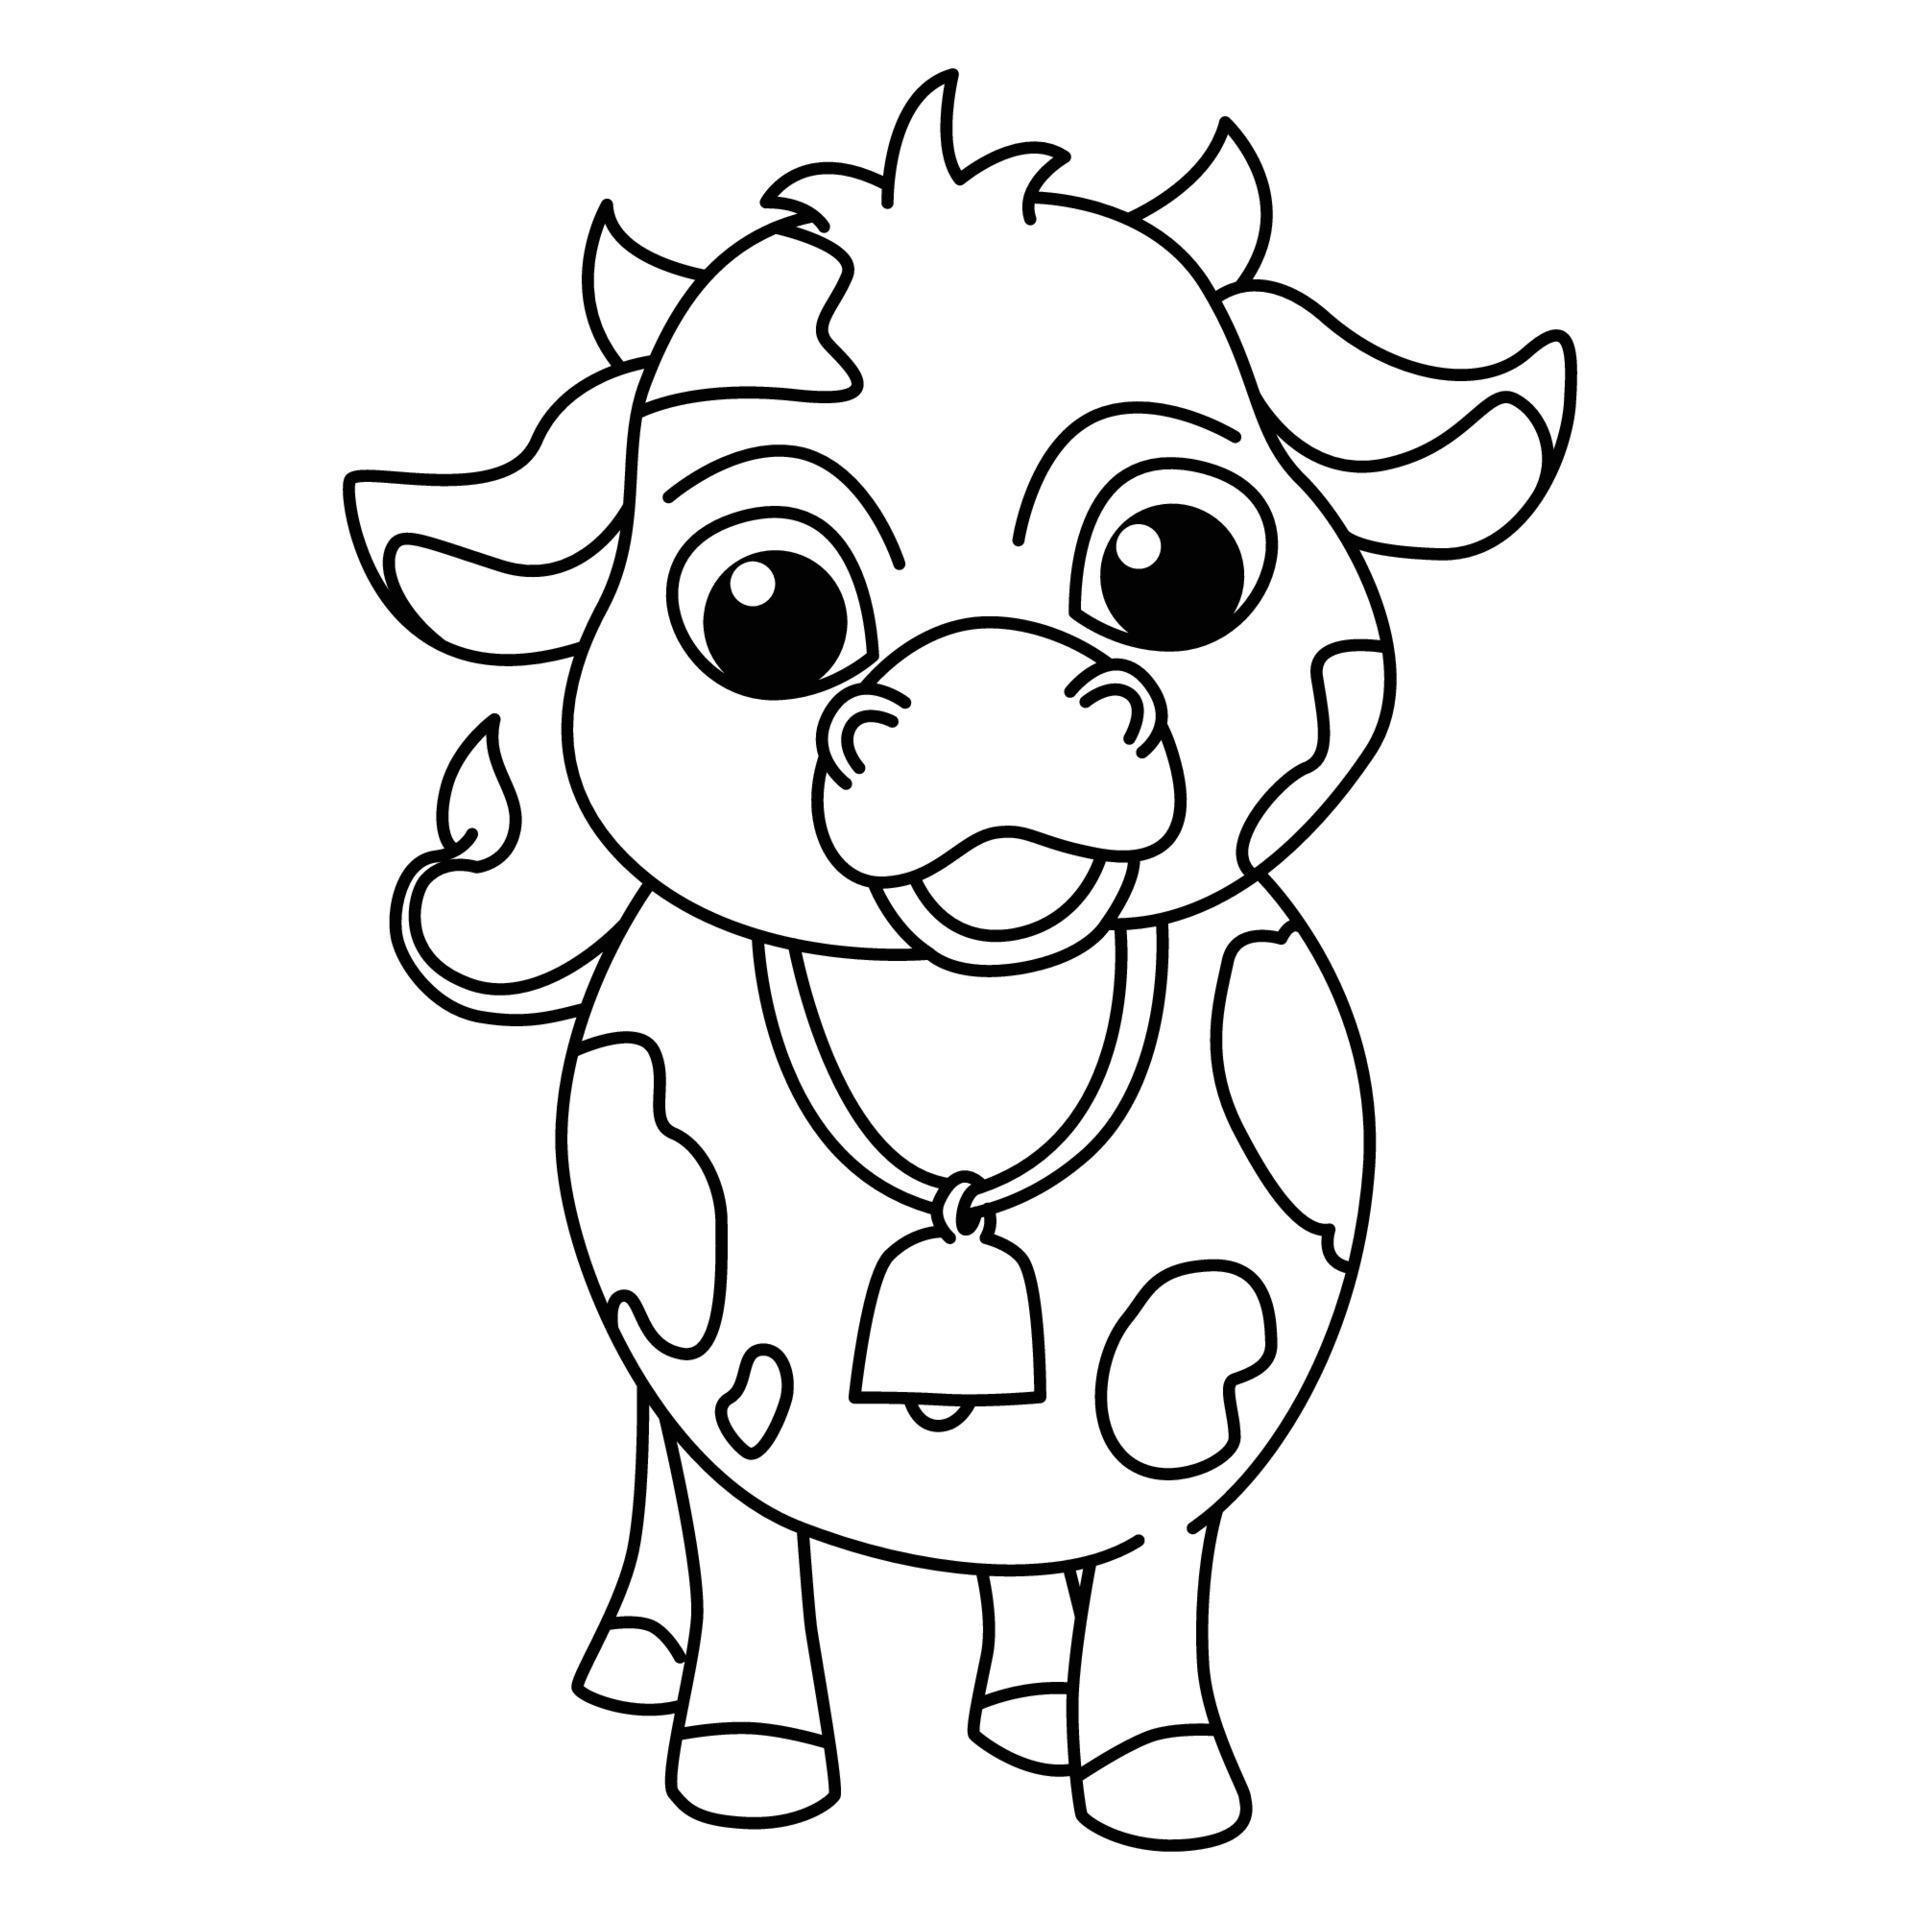 Cute cow cartoon characters vector illustration. For kids coloring book ...